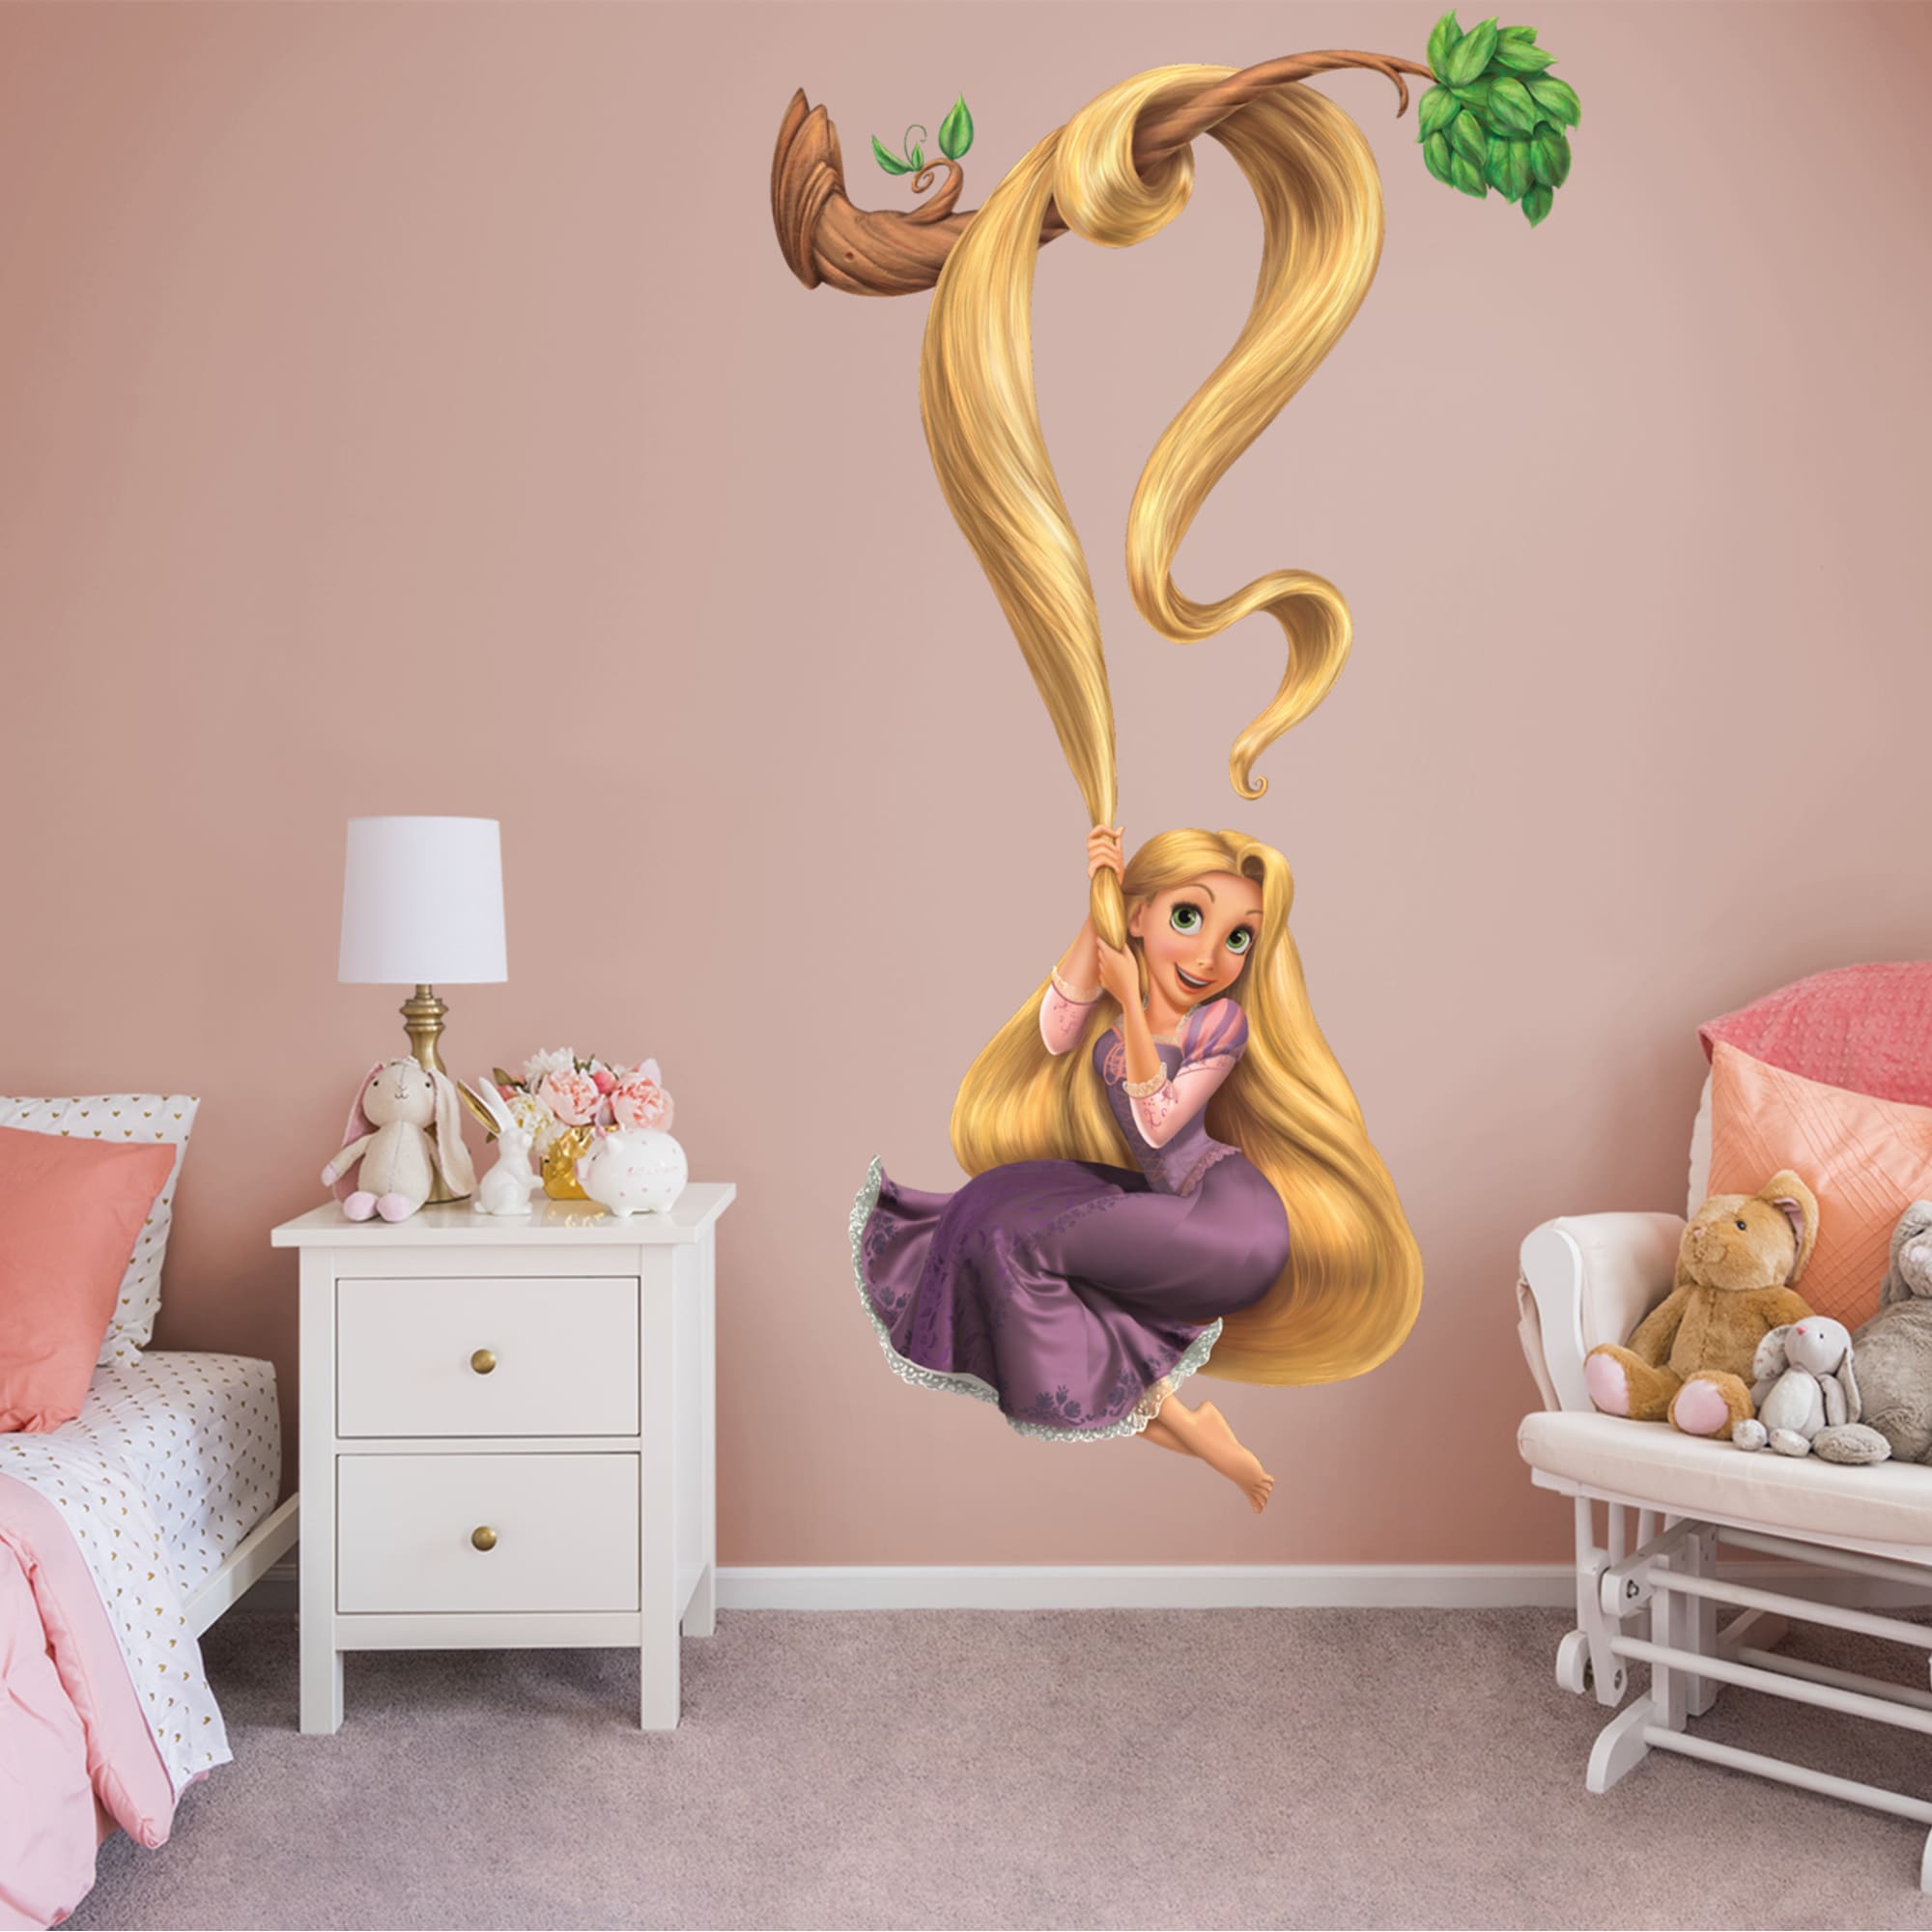 Rapunzel: Tree Branch - Officially Licensed Disney Removable Wall Decal 48.0"W x 89.0"H by Fathead | Vinyl